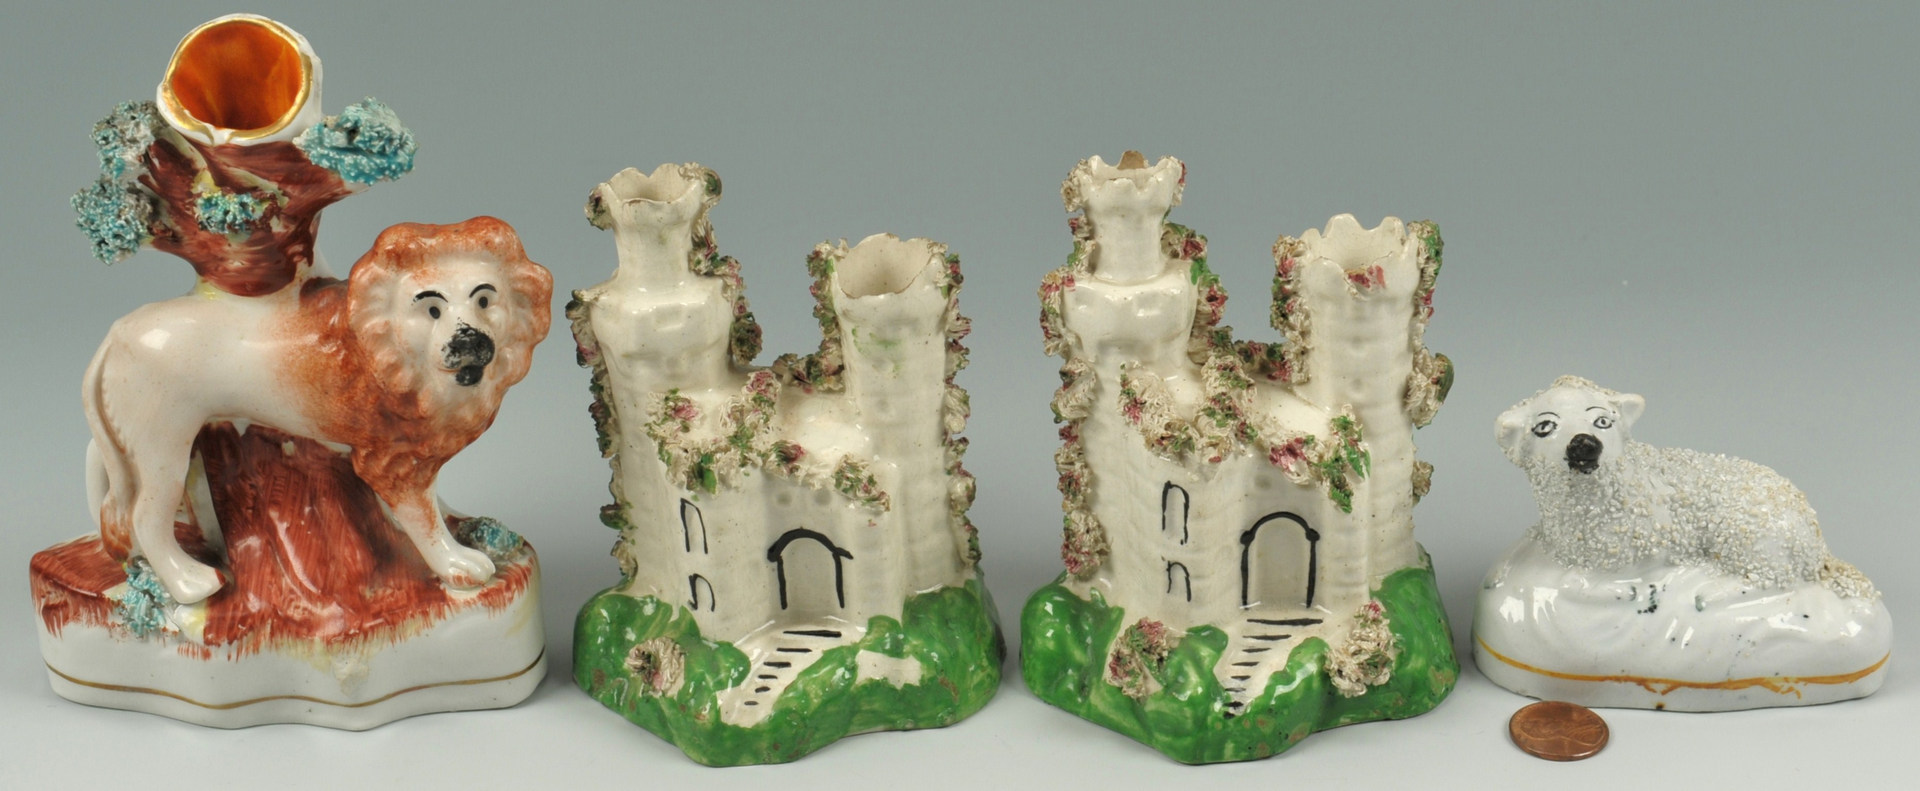 Lot 253: 4 pieces of 19th Century Staffordshire Pottery